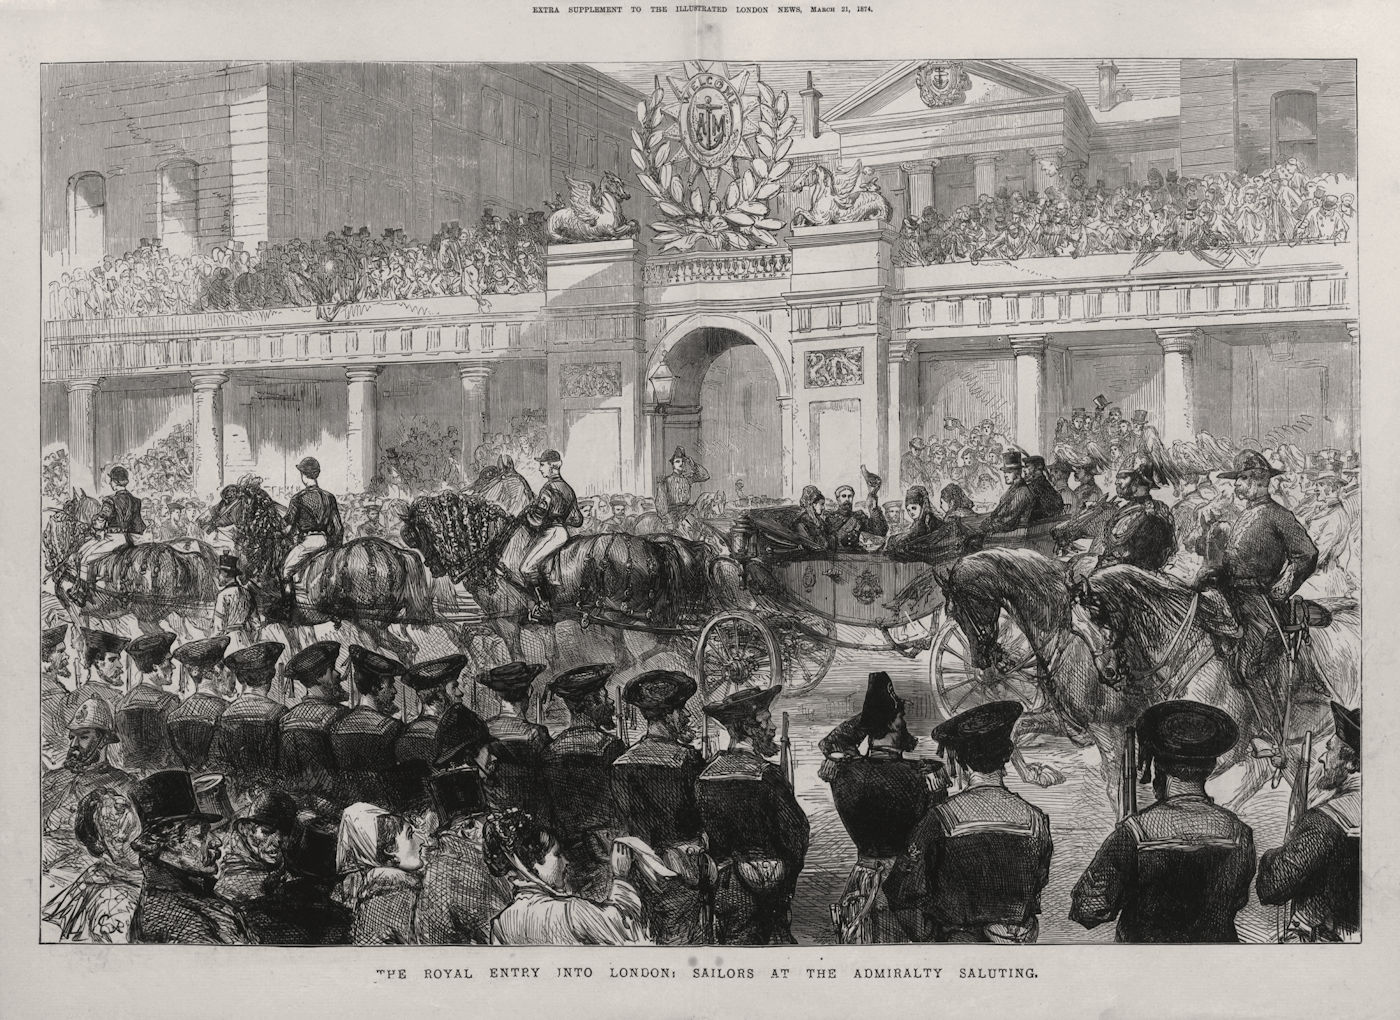 The royal entry into London: sailors at the Admiralty saluting. Royalty 1874